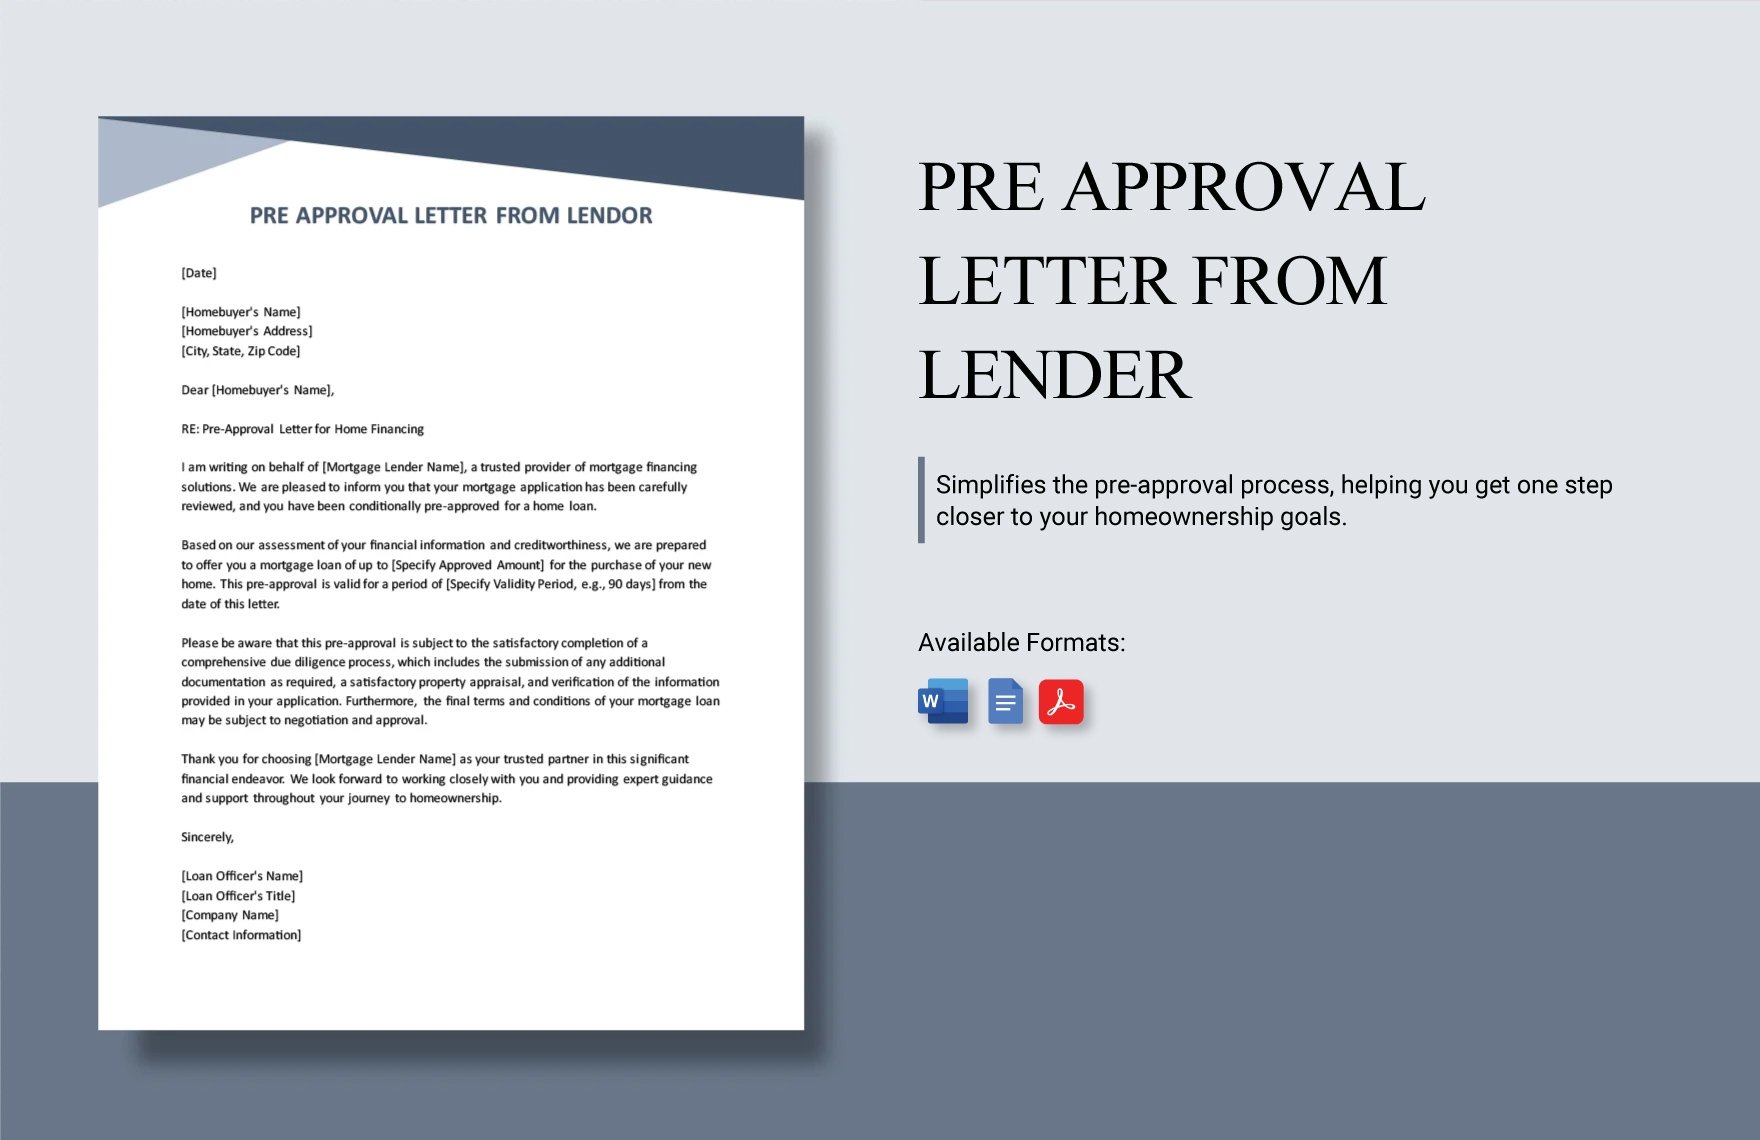 Pre Approval Letter From Lender in Word, Google Docs, PDF